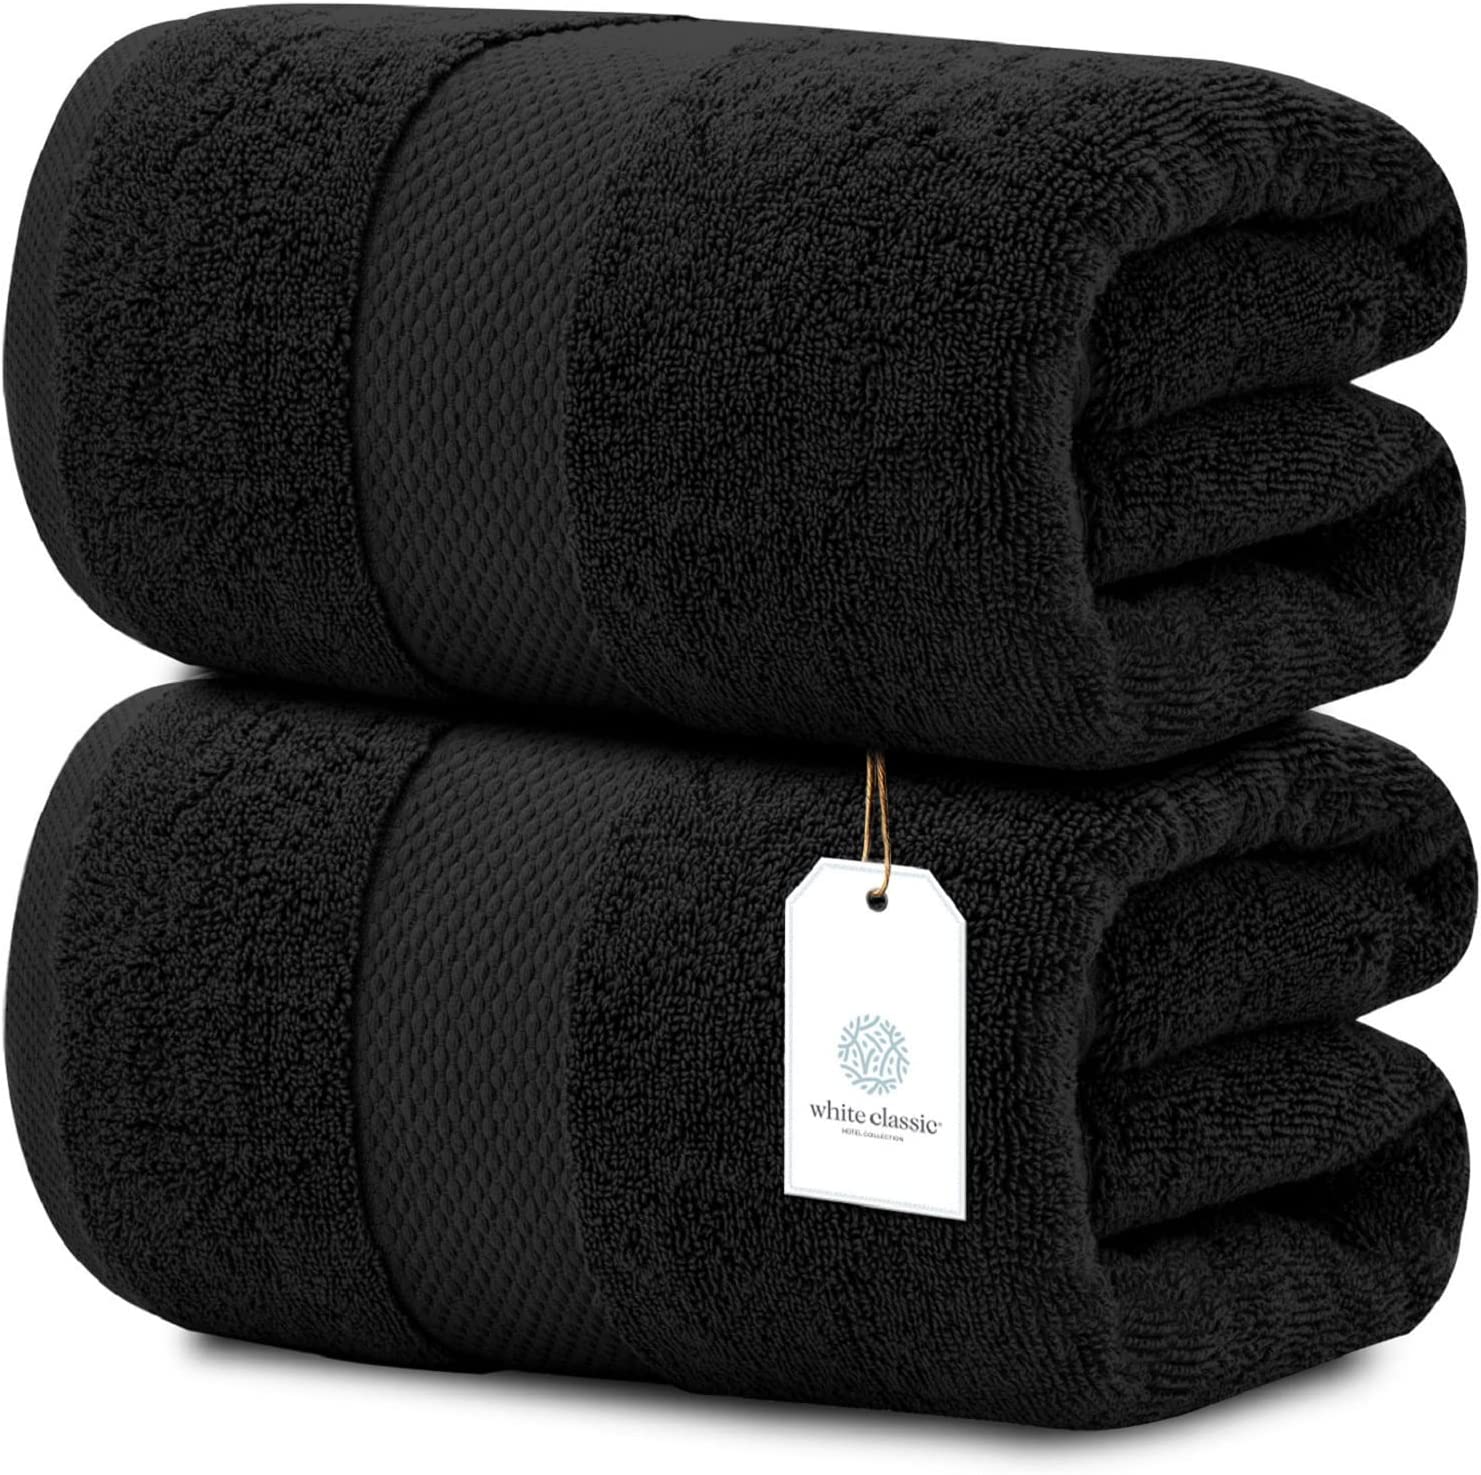 White Classic Luxury Cotton Bath Towels Large -, Highly Absorbent Hotel  spa Collection Bathroom Towel